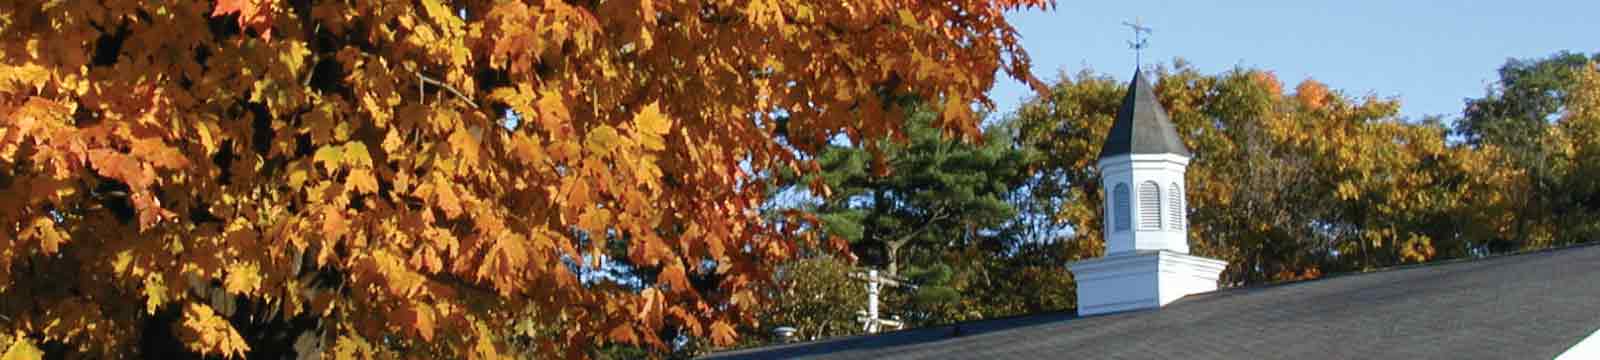 The Cupola on the Top of the Willsboro Roof next to a tree of autumn leaves